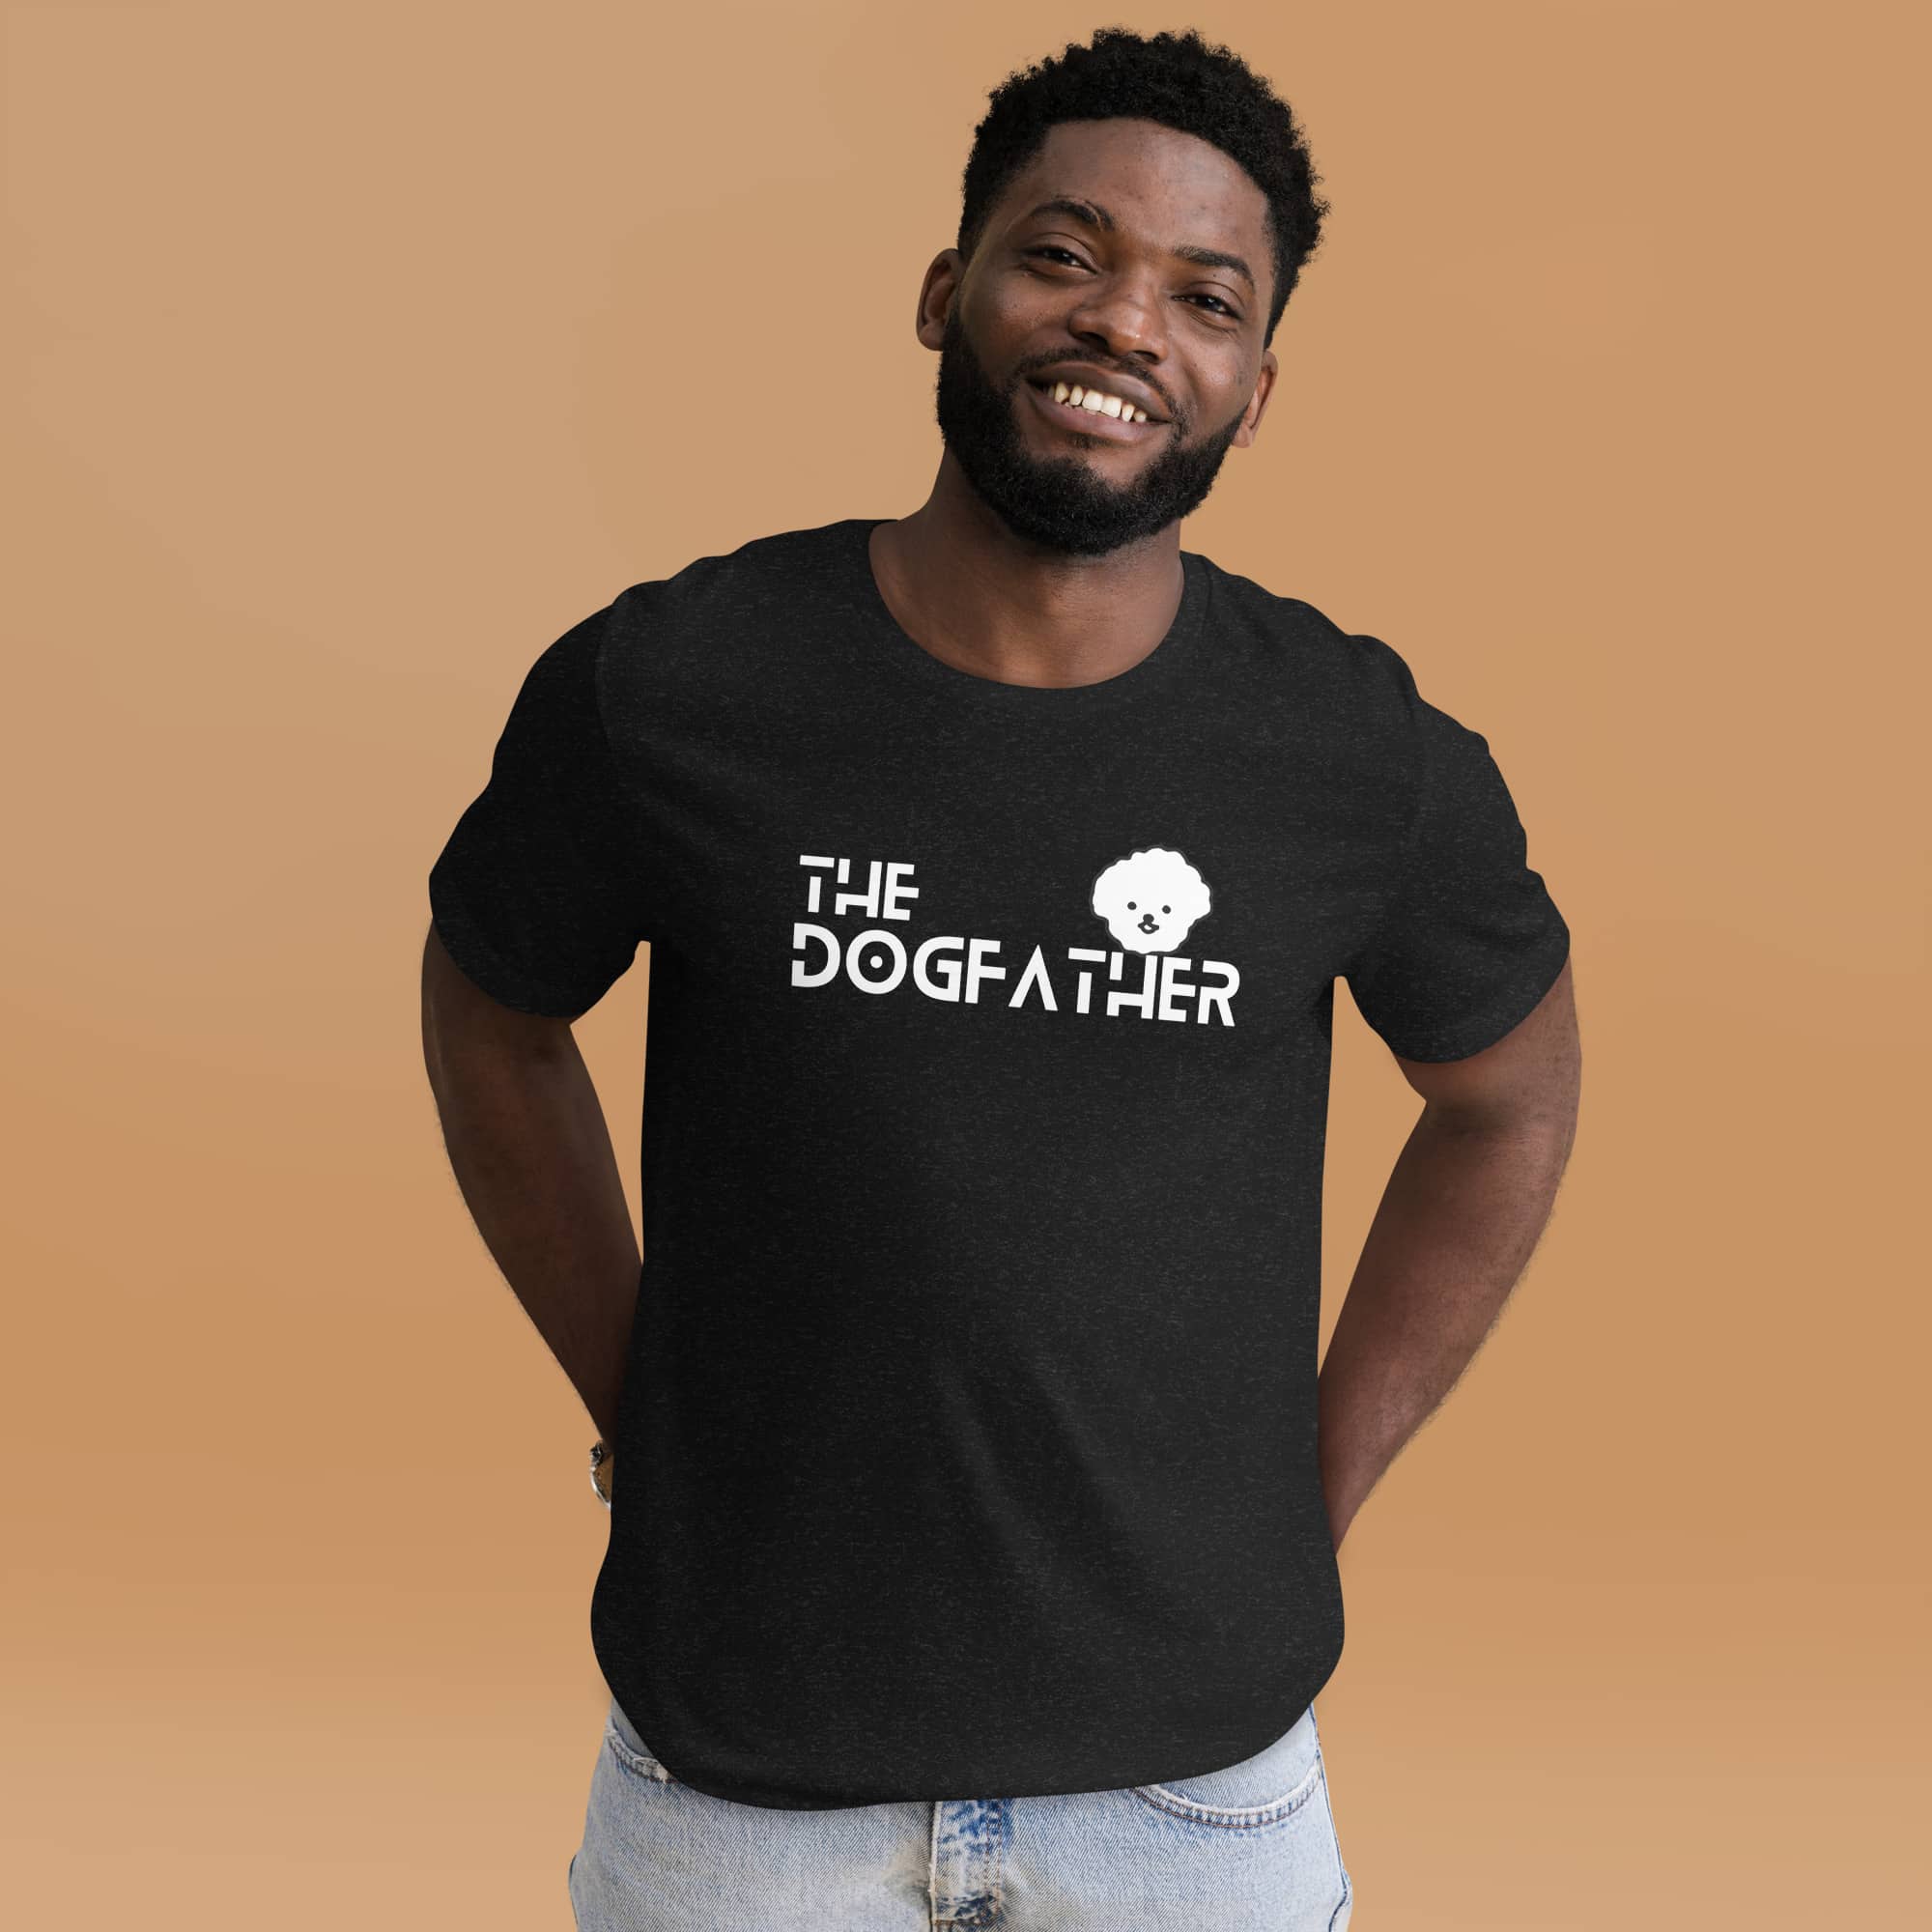 The Dogfather Poodles Unisex T-Shirt. Black Heather. Male